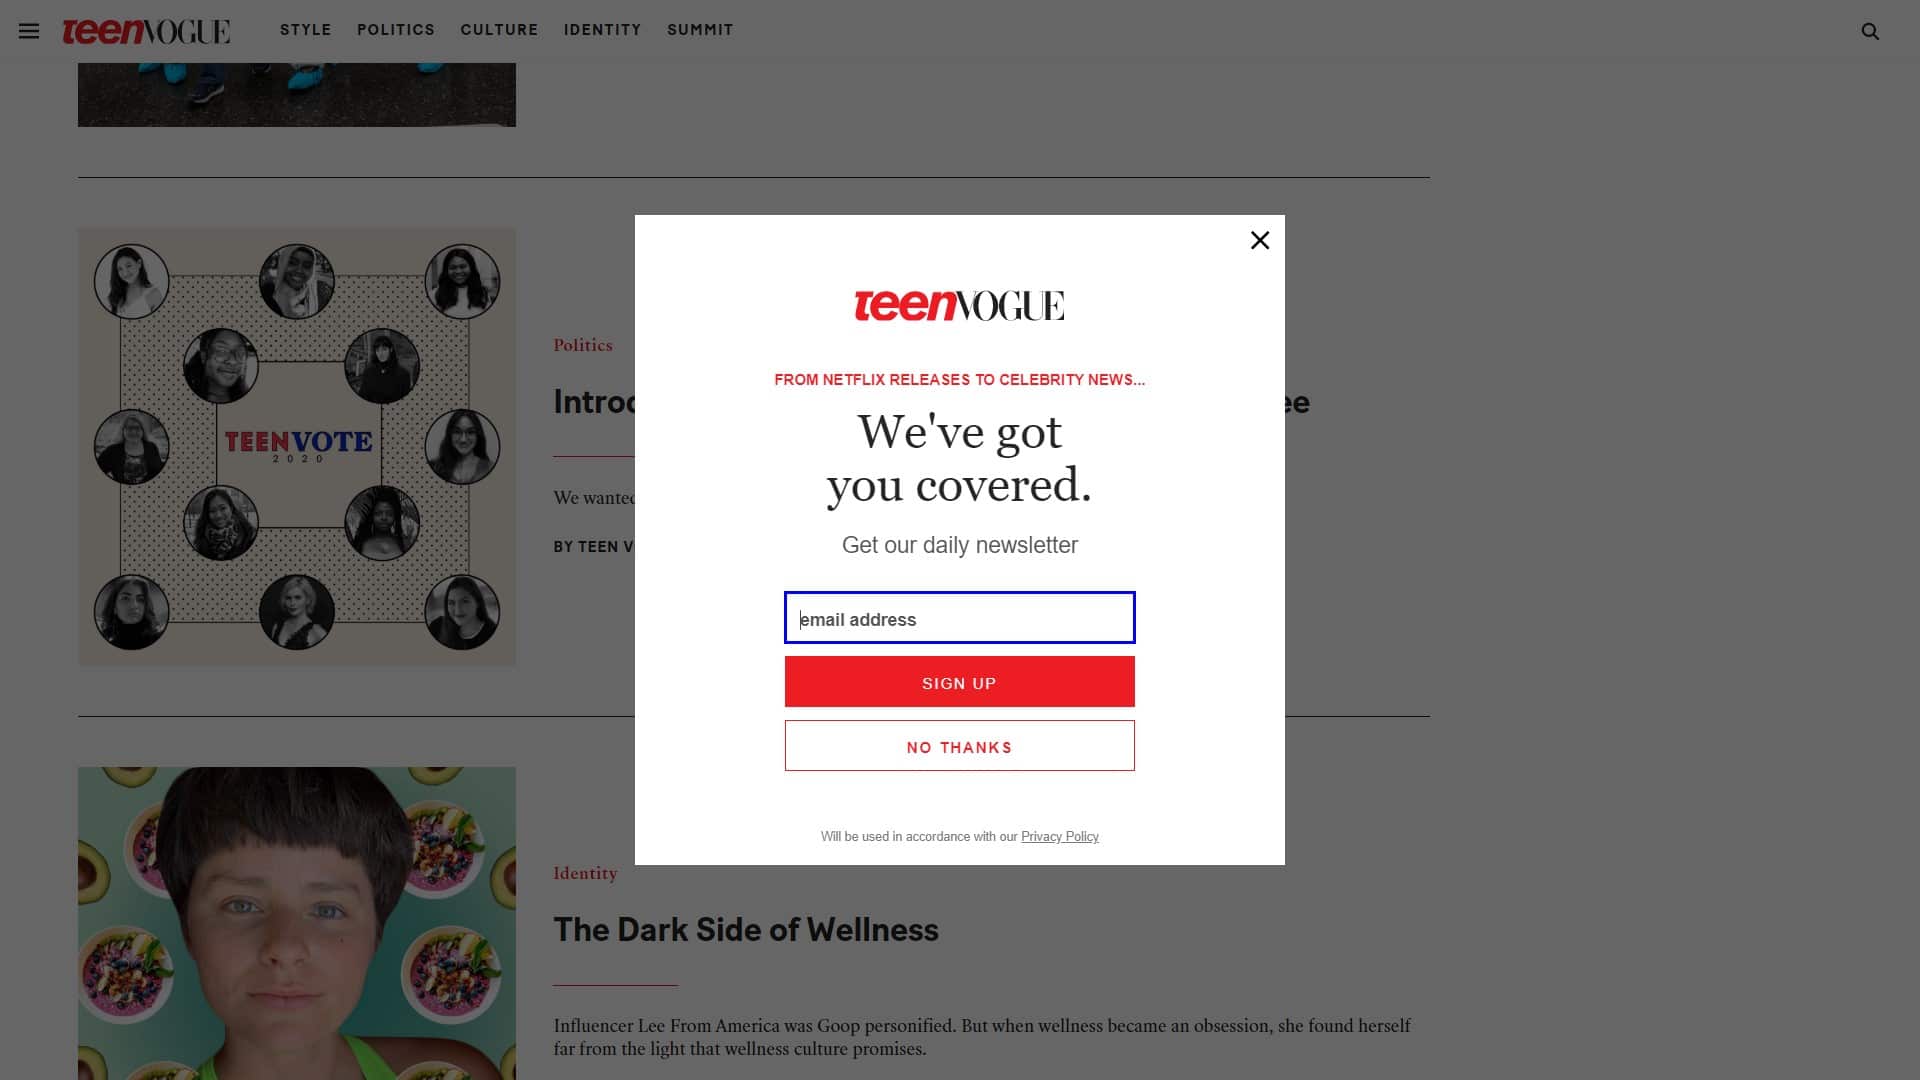 Teen Vogue newsletter signup form popup appealing to a young audience